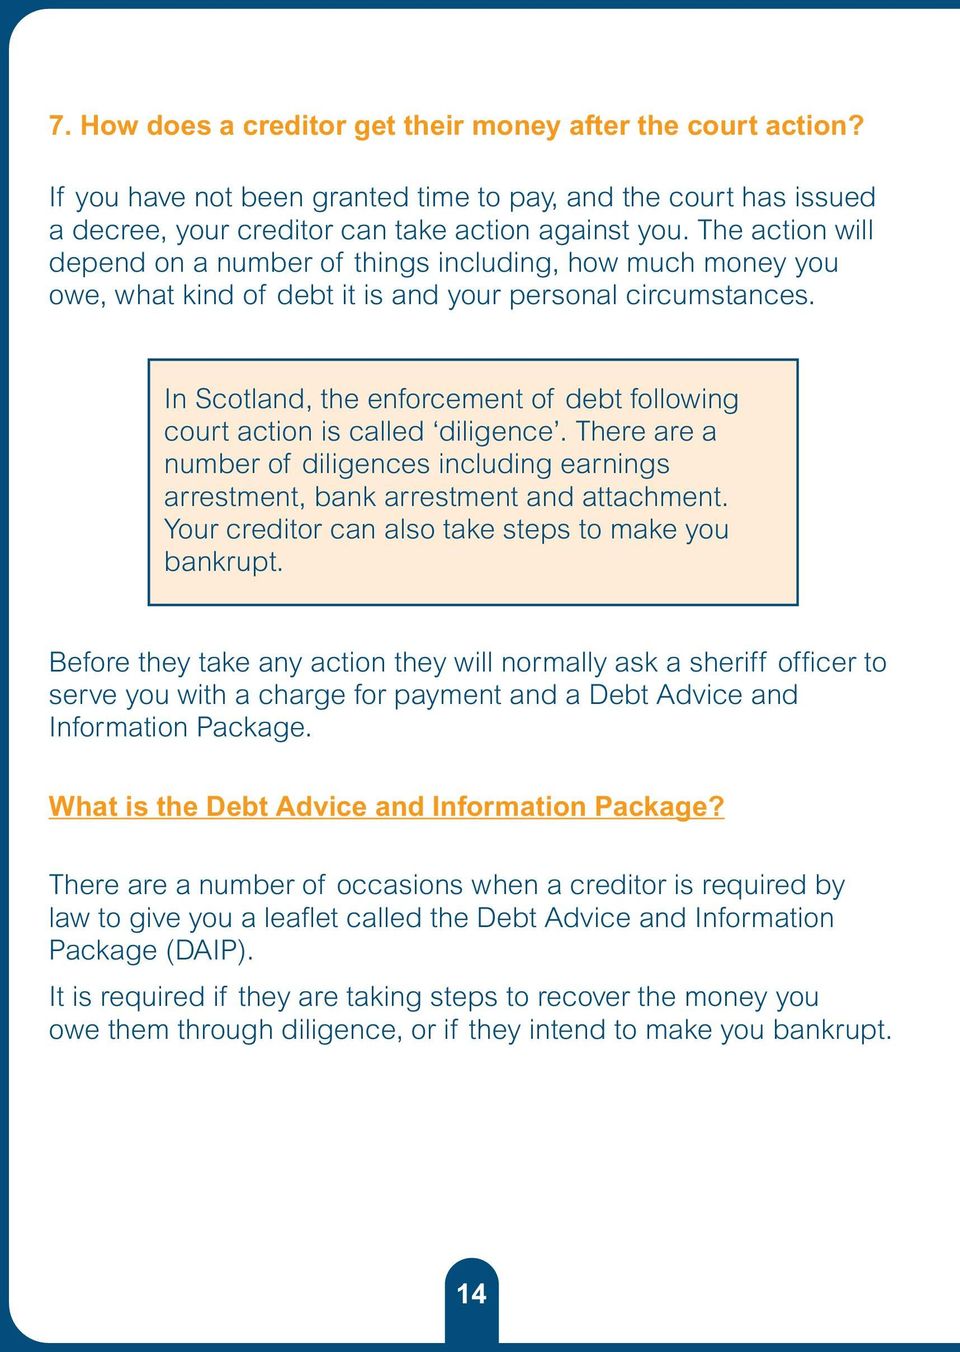 In Scotland, the enforcement of debt following court action is called diligence. There are a number of diligences including earnings arrestment, bank arrestment and attachment.